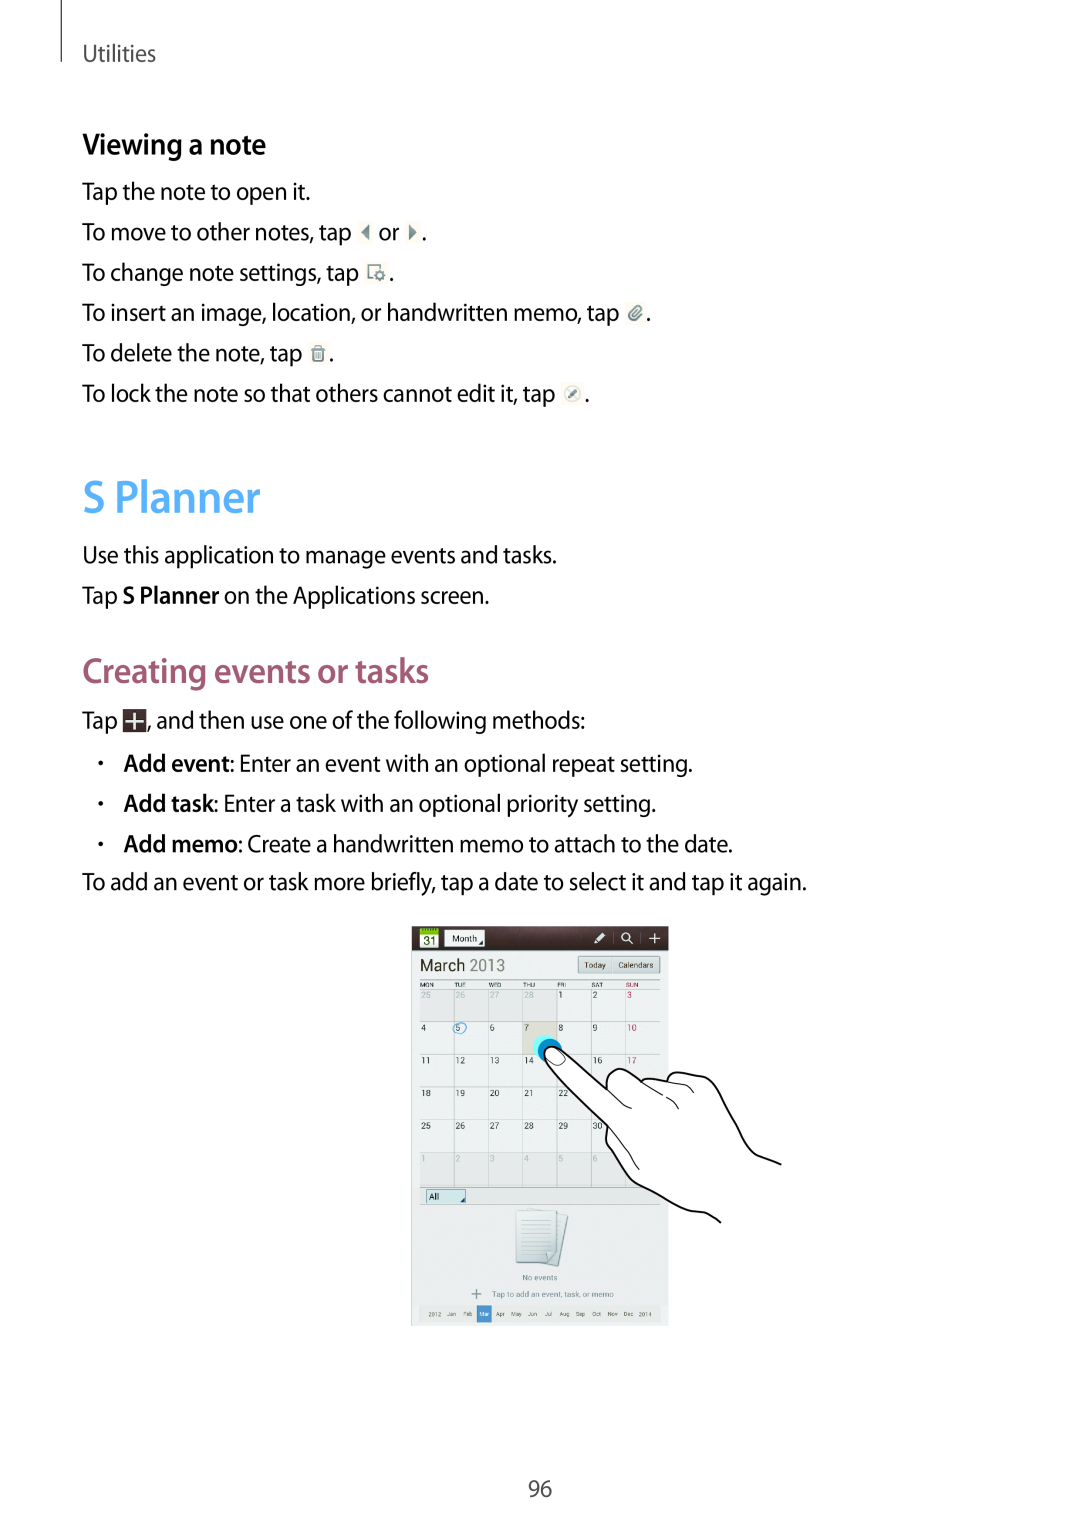 Samsung GT-N5100 user manual S Planner, Creating events or tasks, Viewing a note, Utilities 